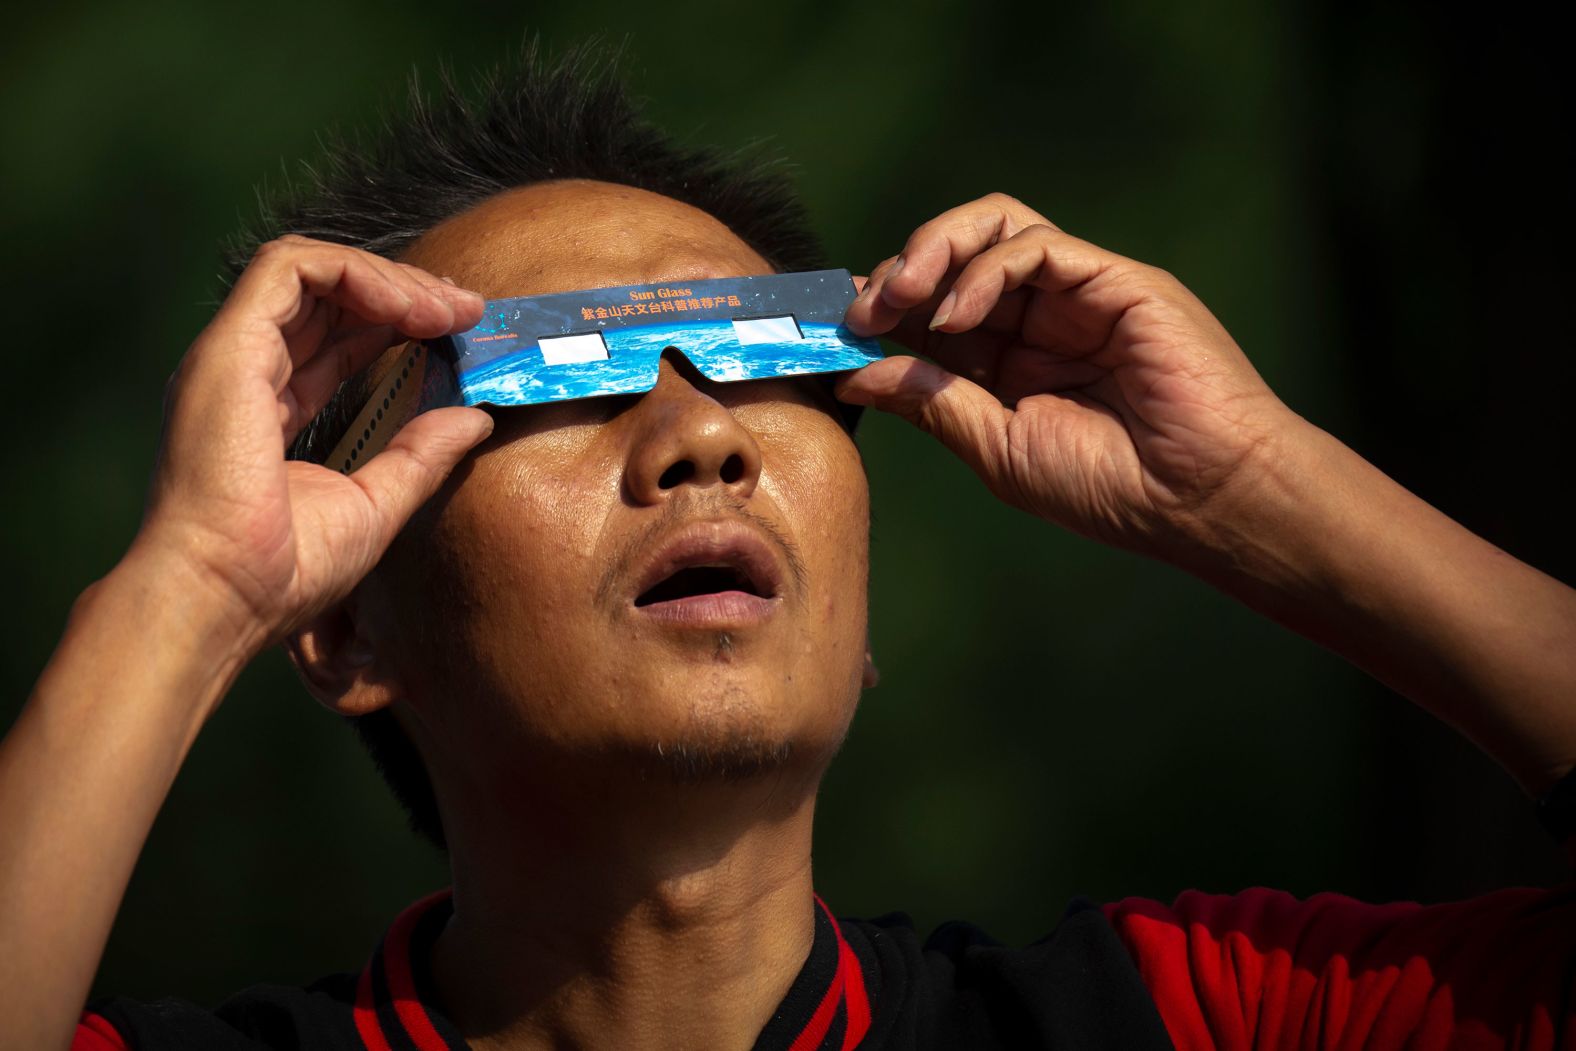 A man uses solar glasses to look at the partial eclipse near the Forbidden City in Beijing.